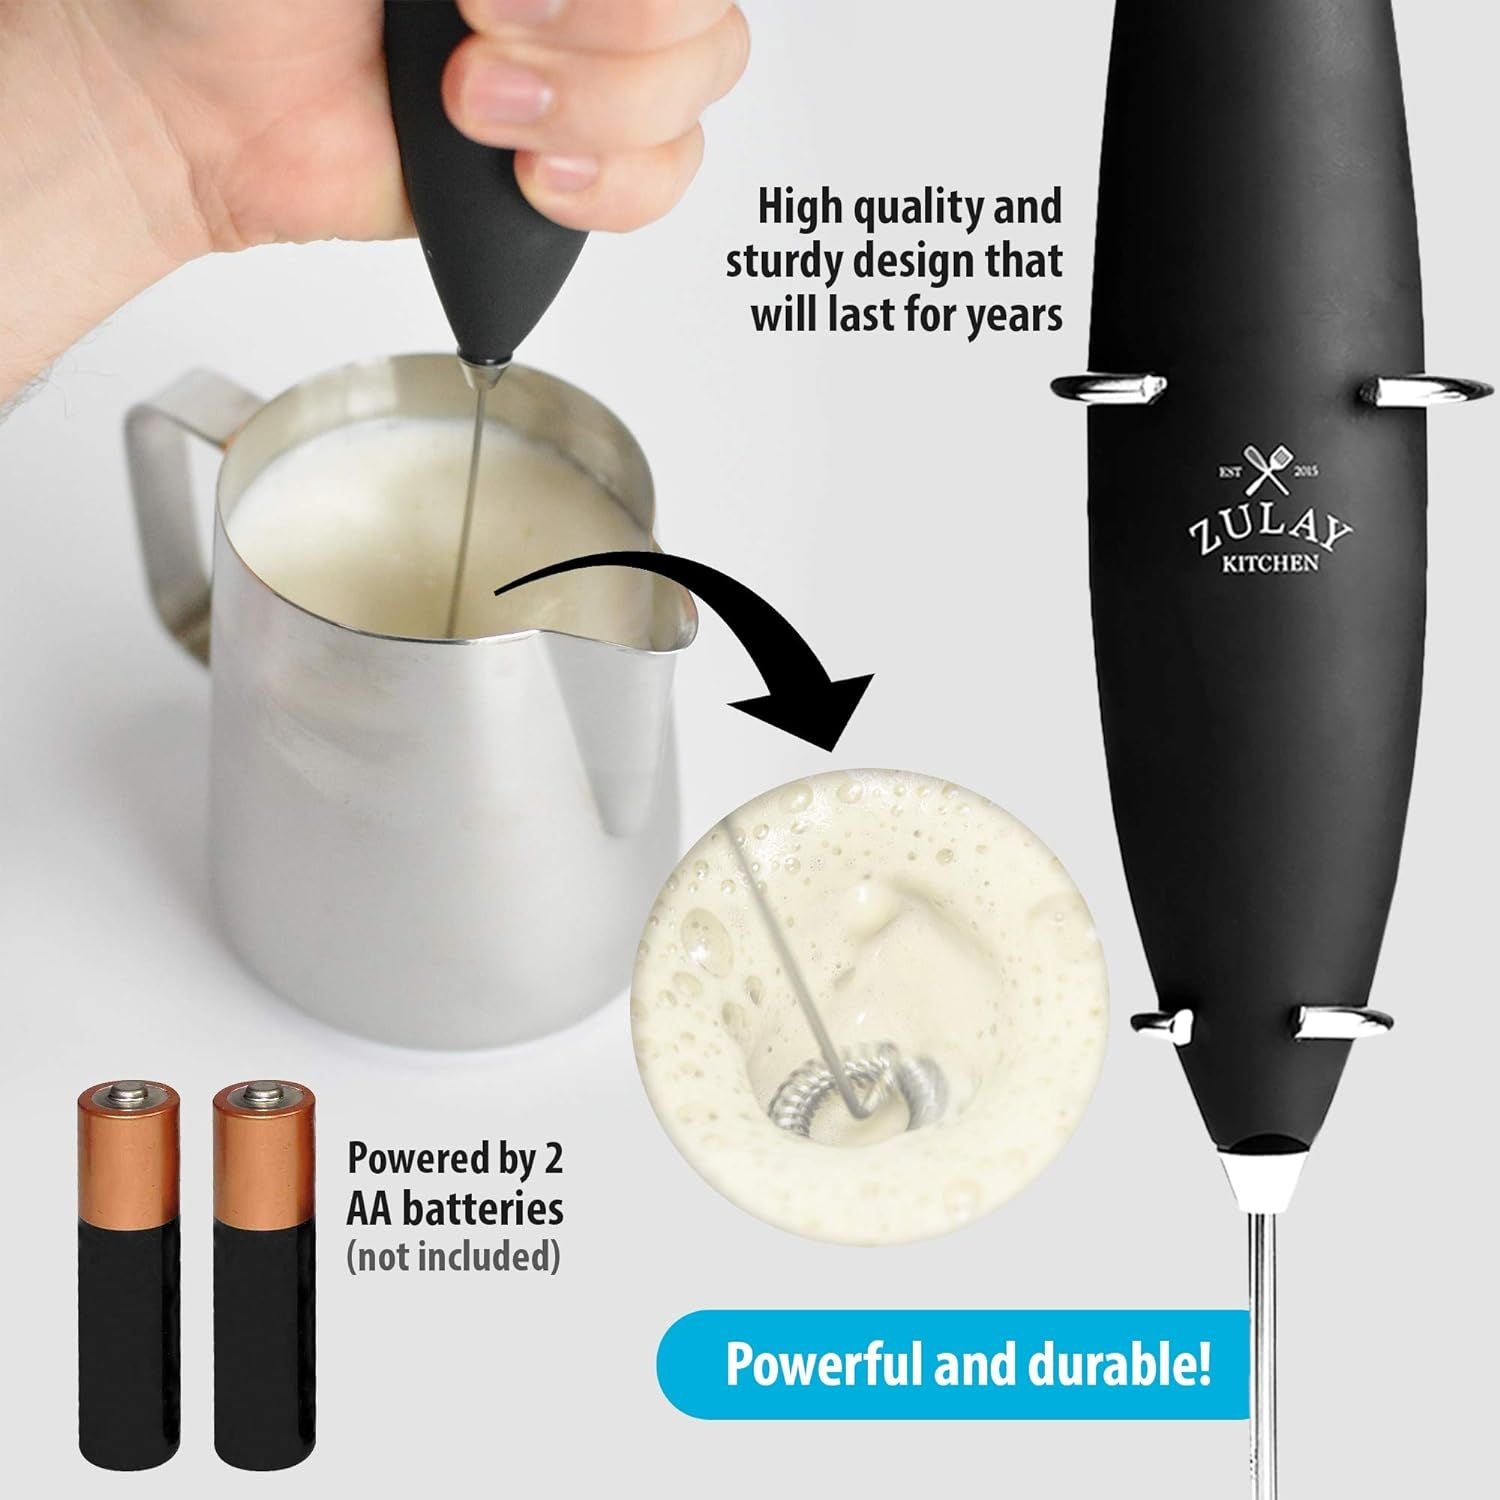 Get Perfect Foam Every Time with the Zulay Powerful Milk Frother!